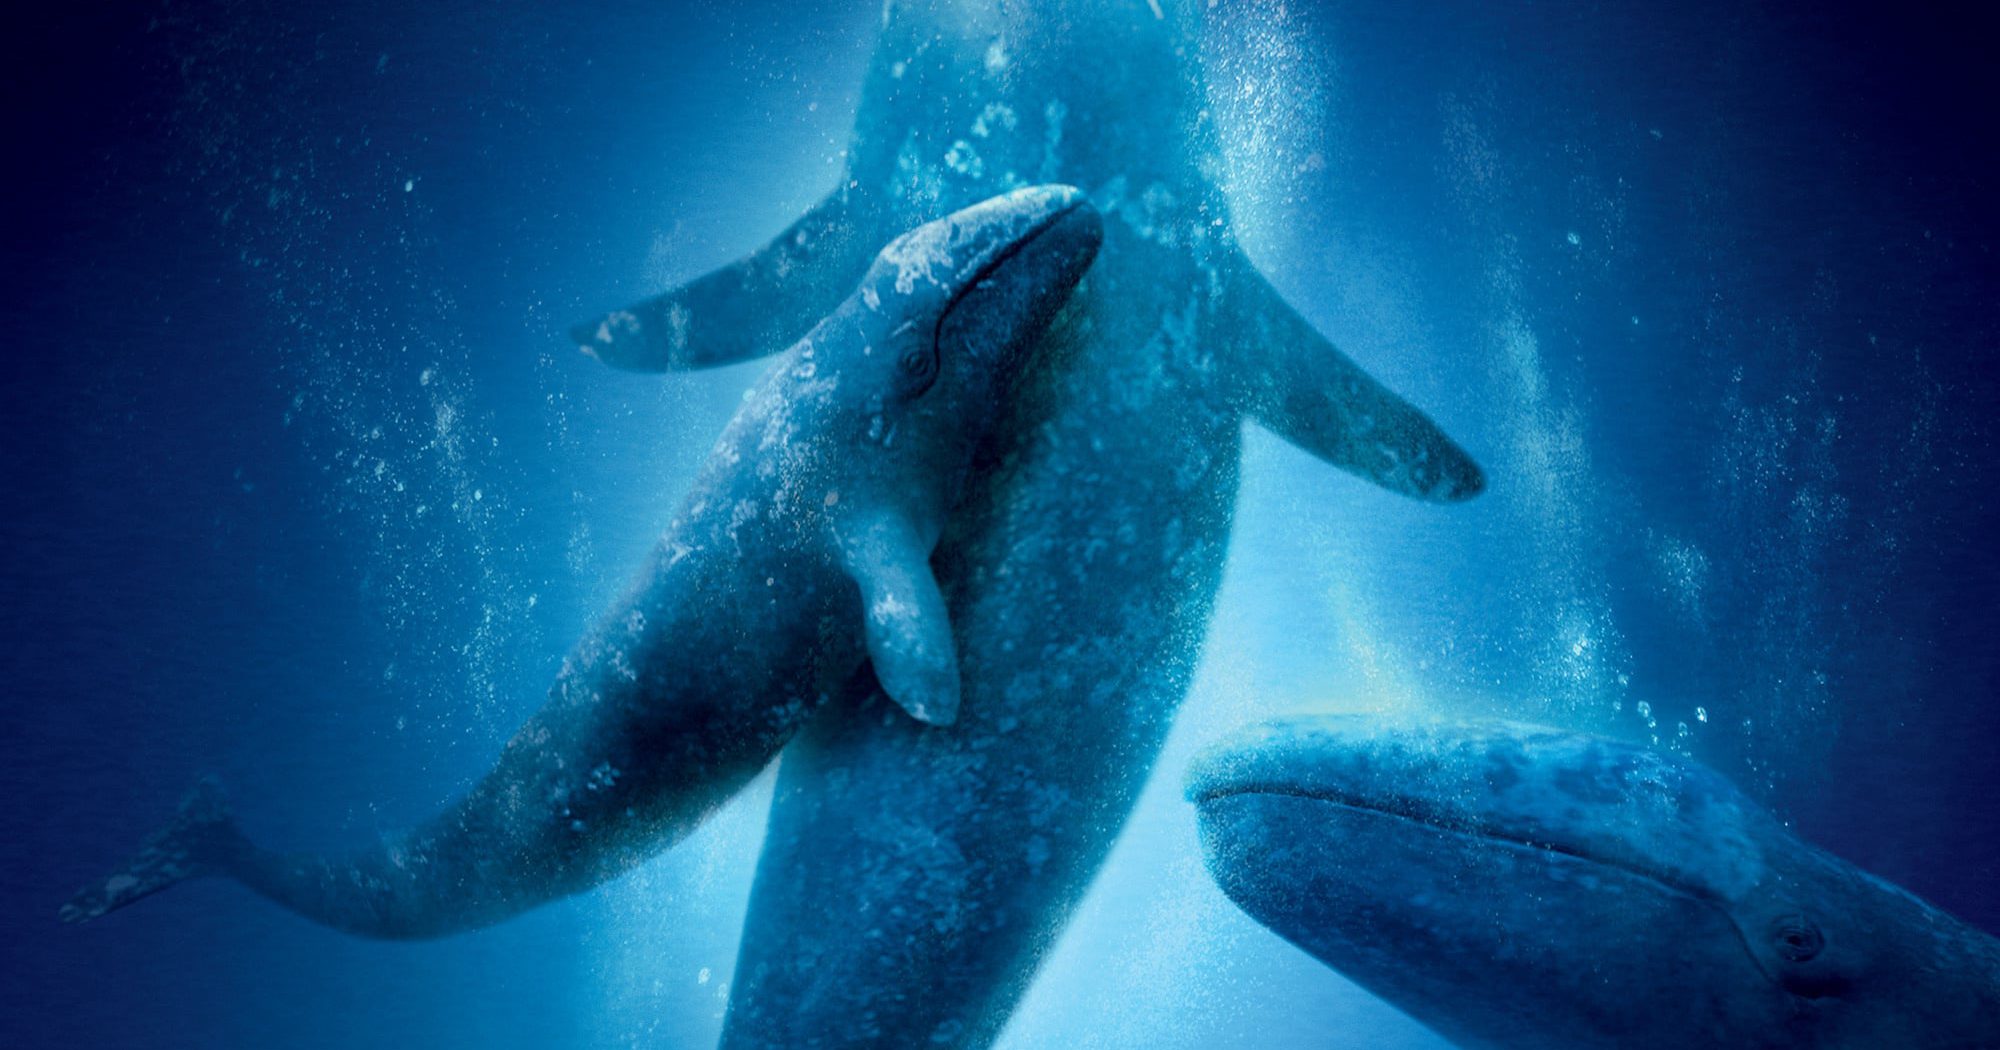 Poster for the movie "Big Miracle"